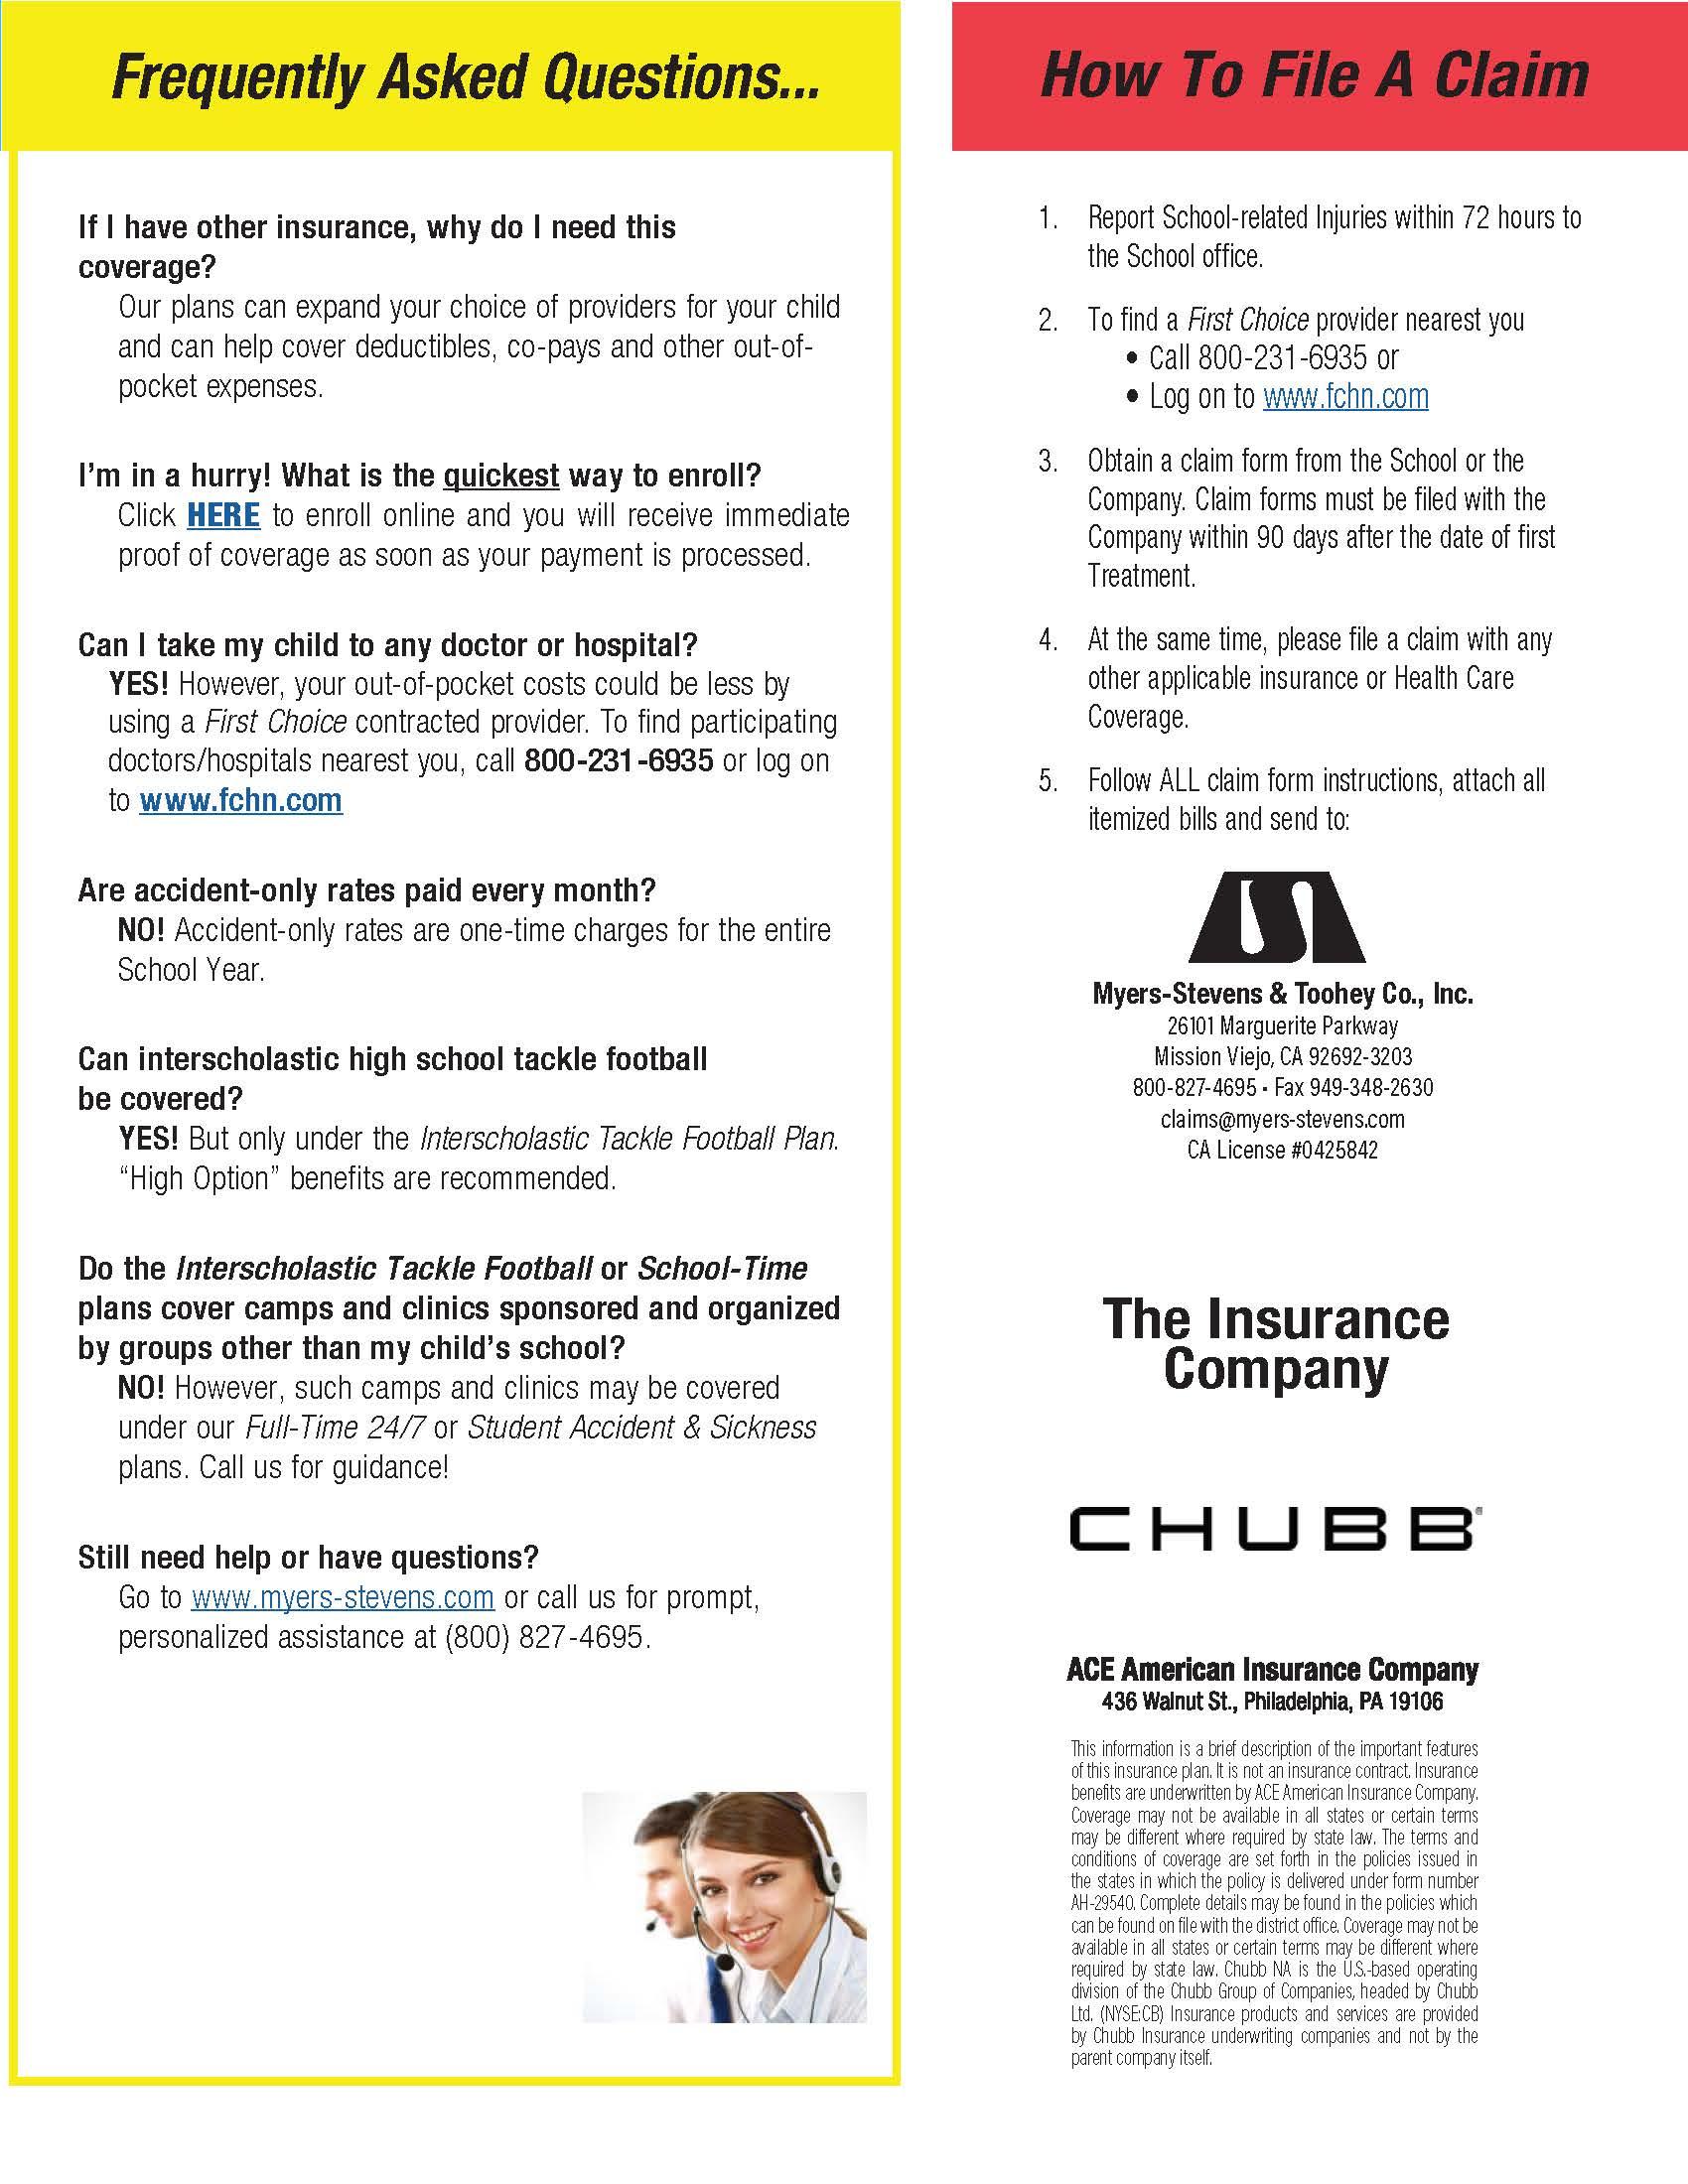 Supplemental Insurance page 5